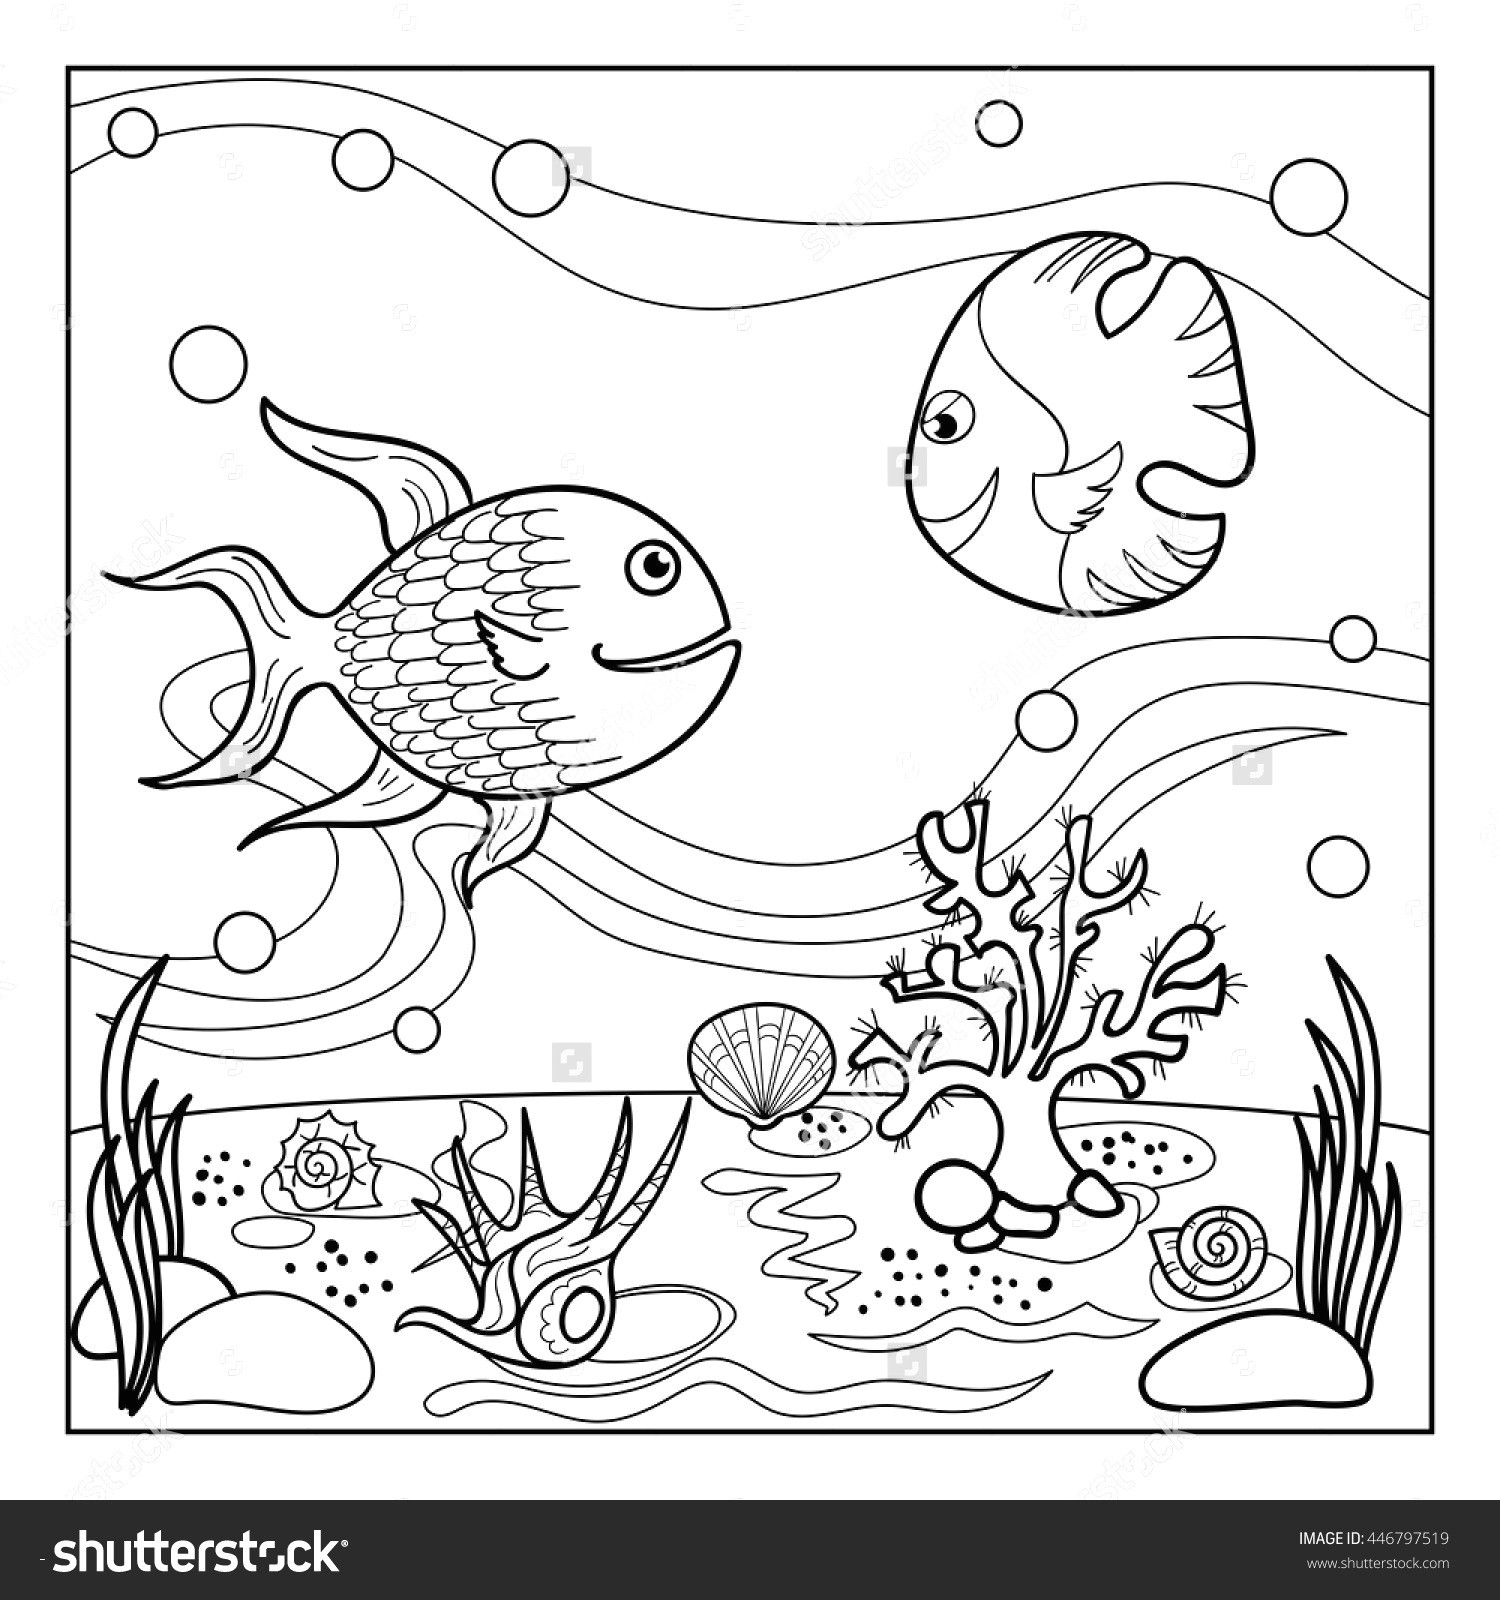 easy to draw feather feather coloring page fresh home coloring pages best color sheet 0d